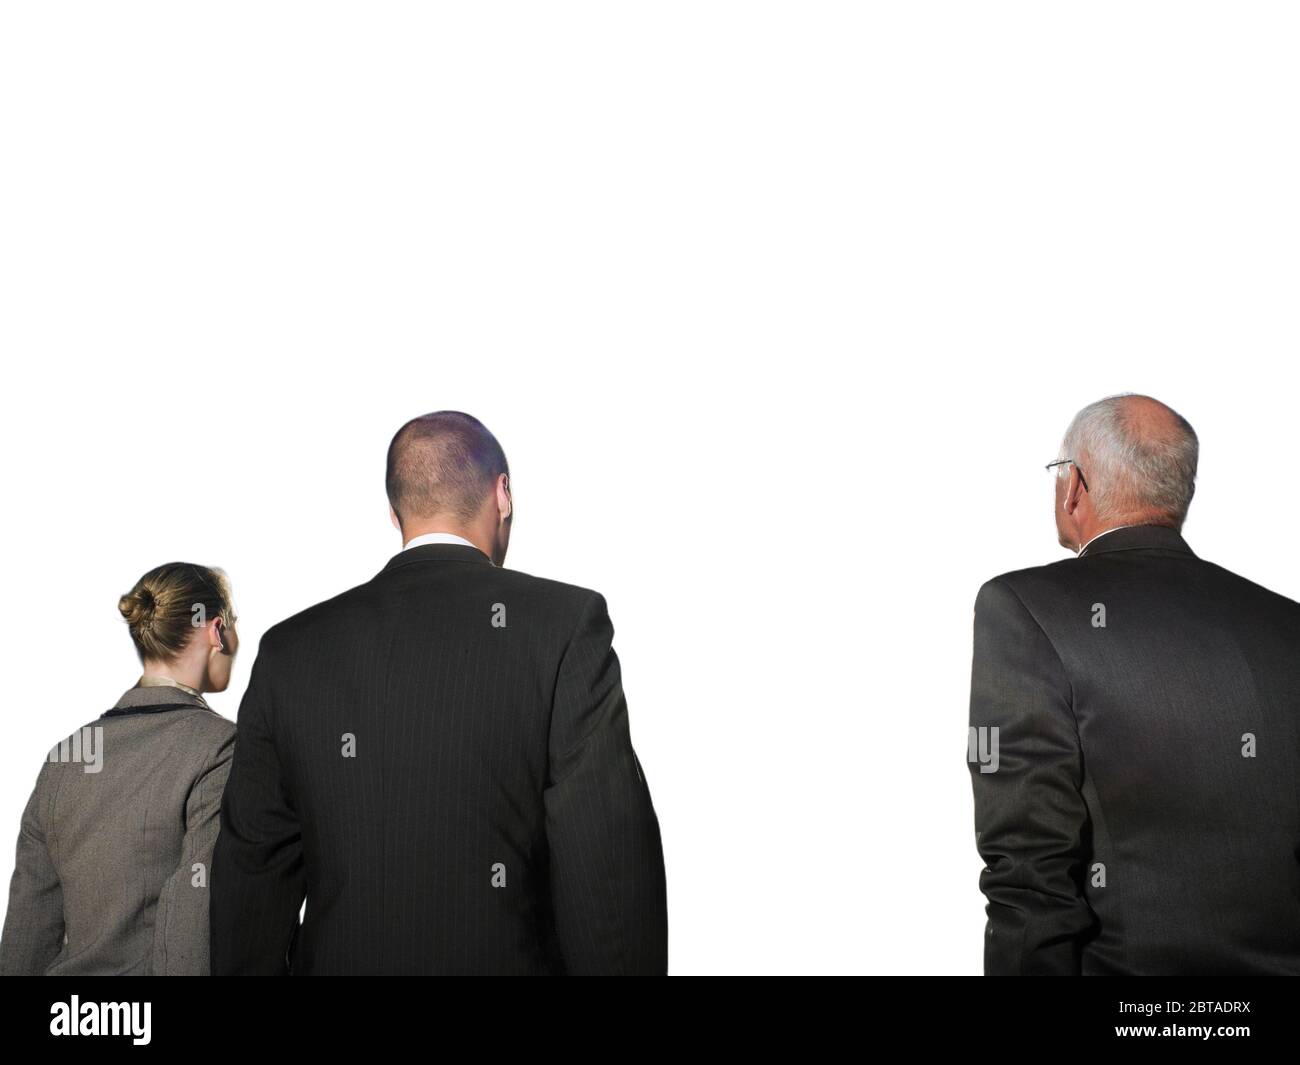 Isolated photo of Rear view of three business people Stock Photo